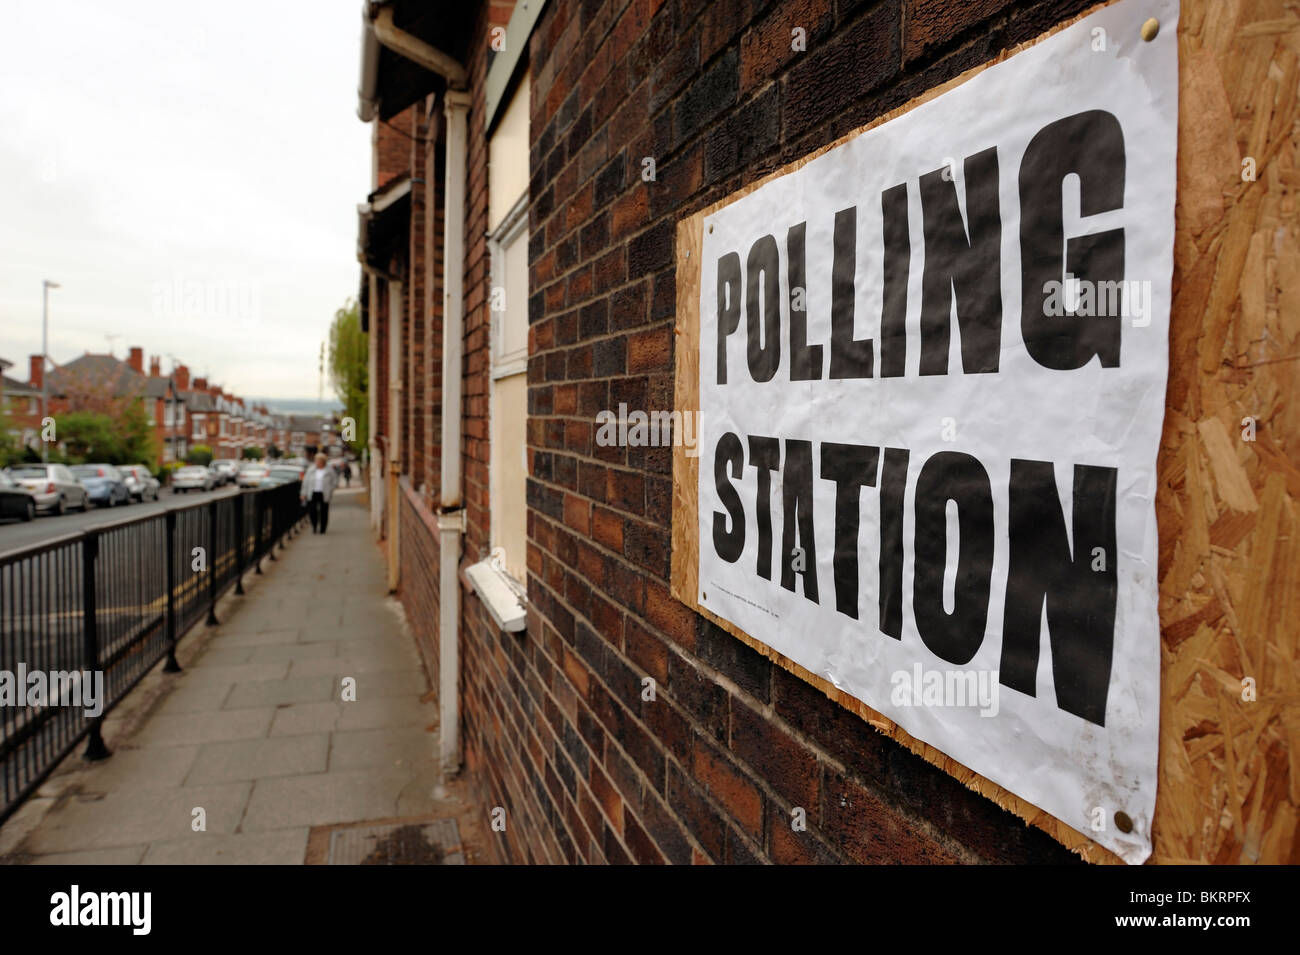 Election Polling Station Stock Photo